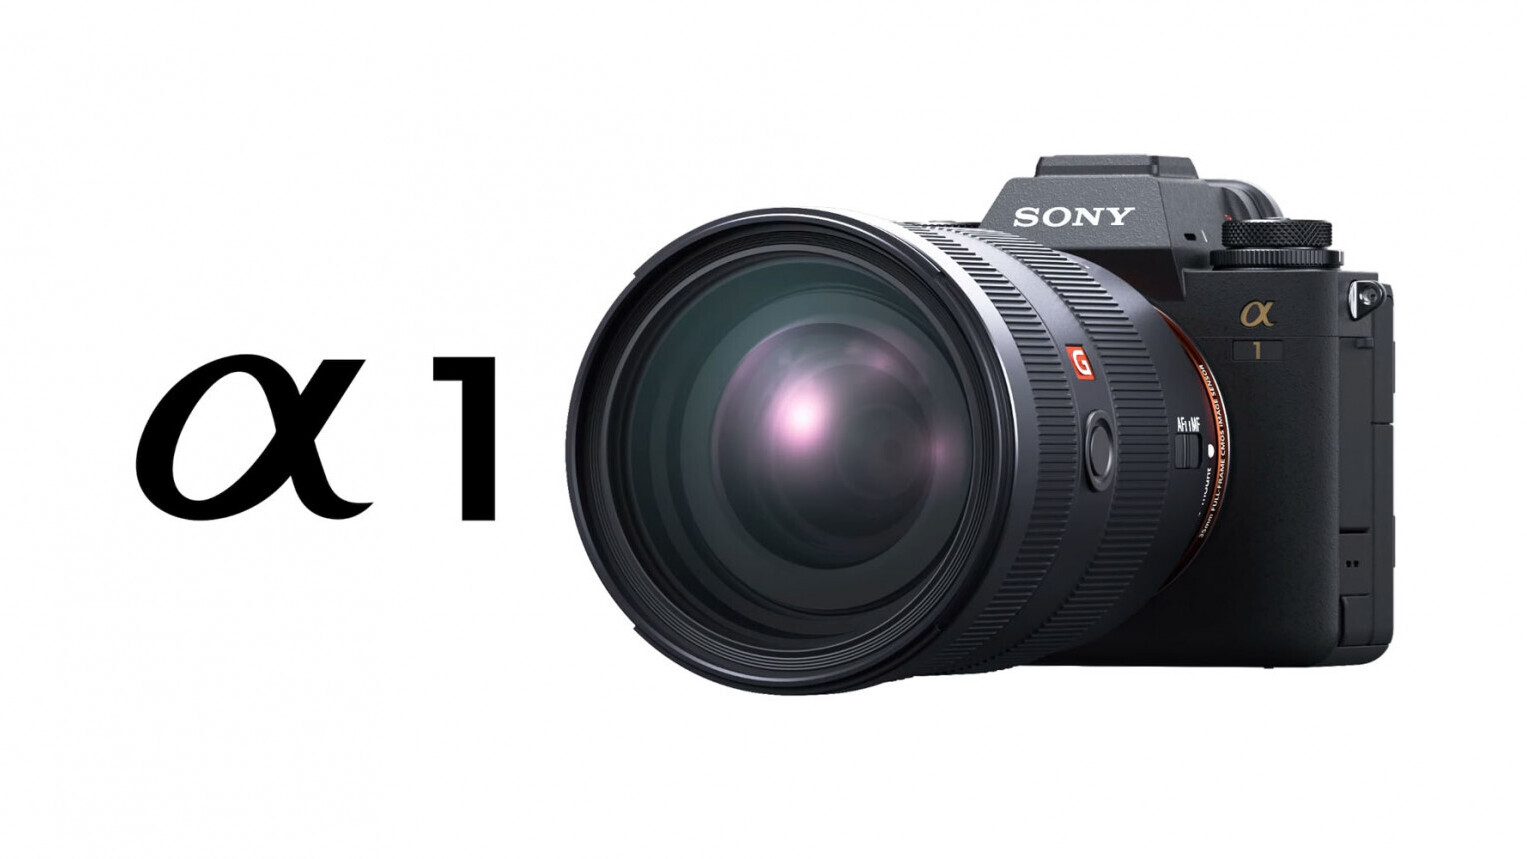 Sony’s $6,498 a1 is an overkill camera for photo and video pros